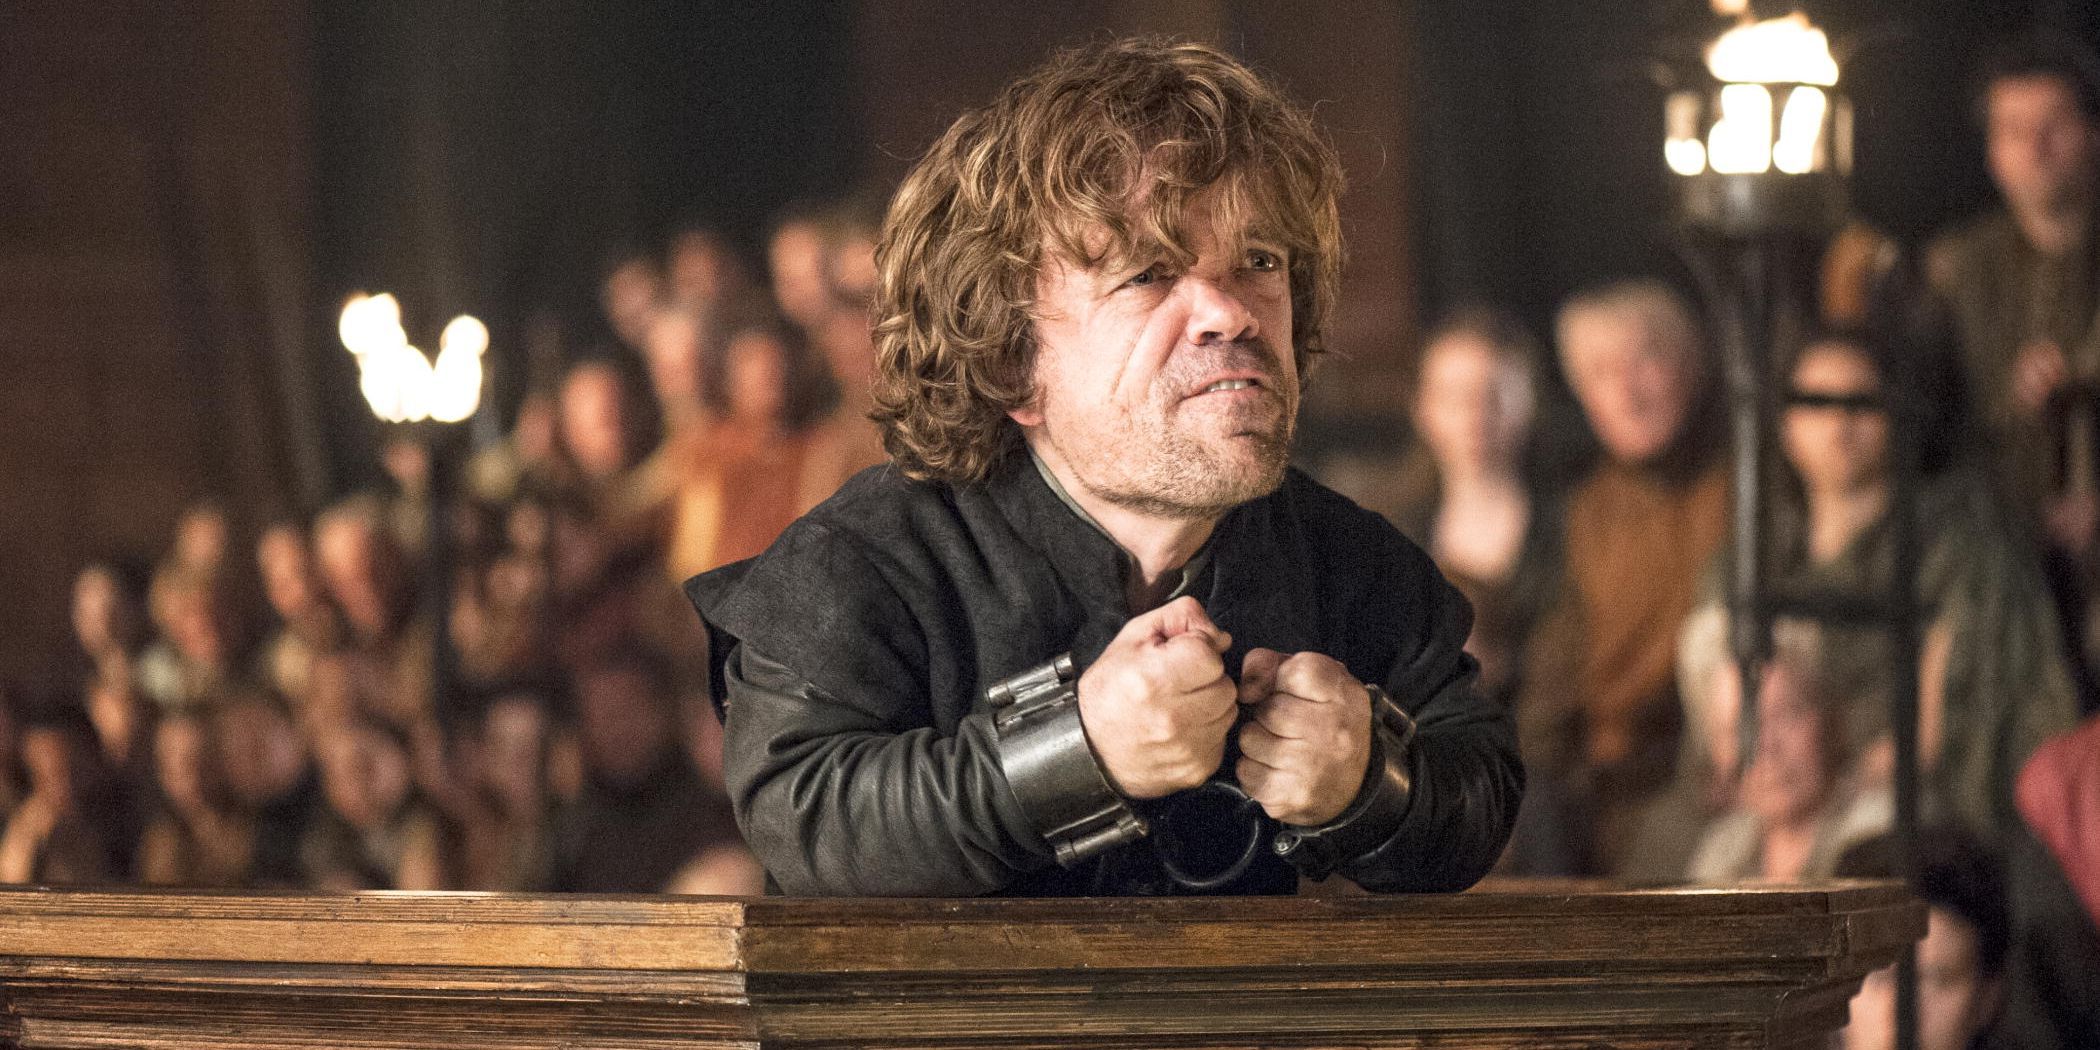 The Biggest Arguments On Game Of Thrones Ranked